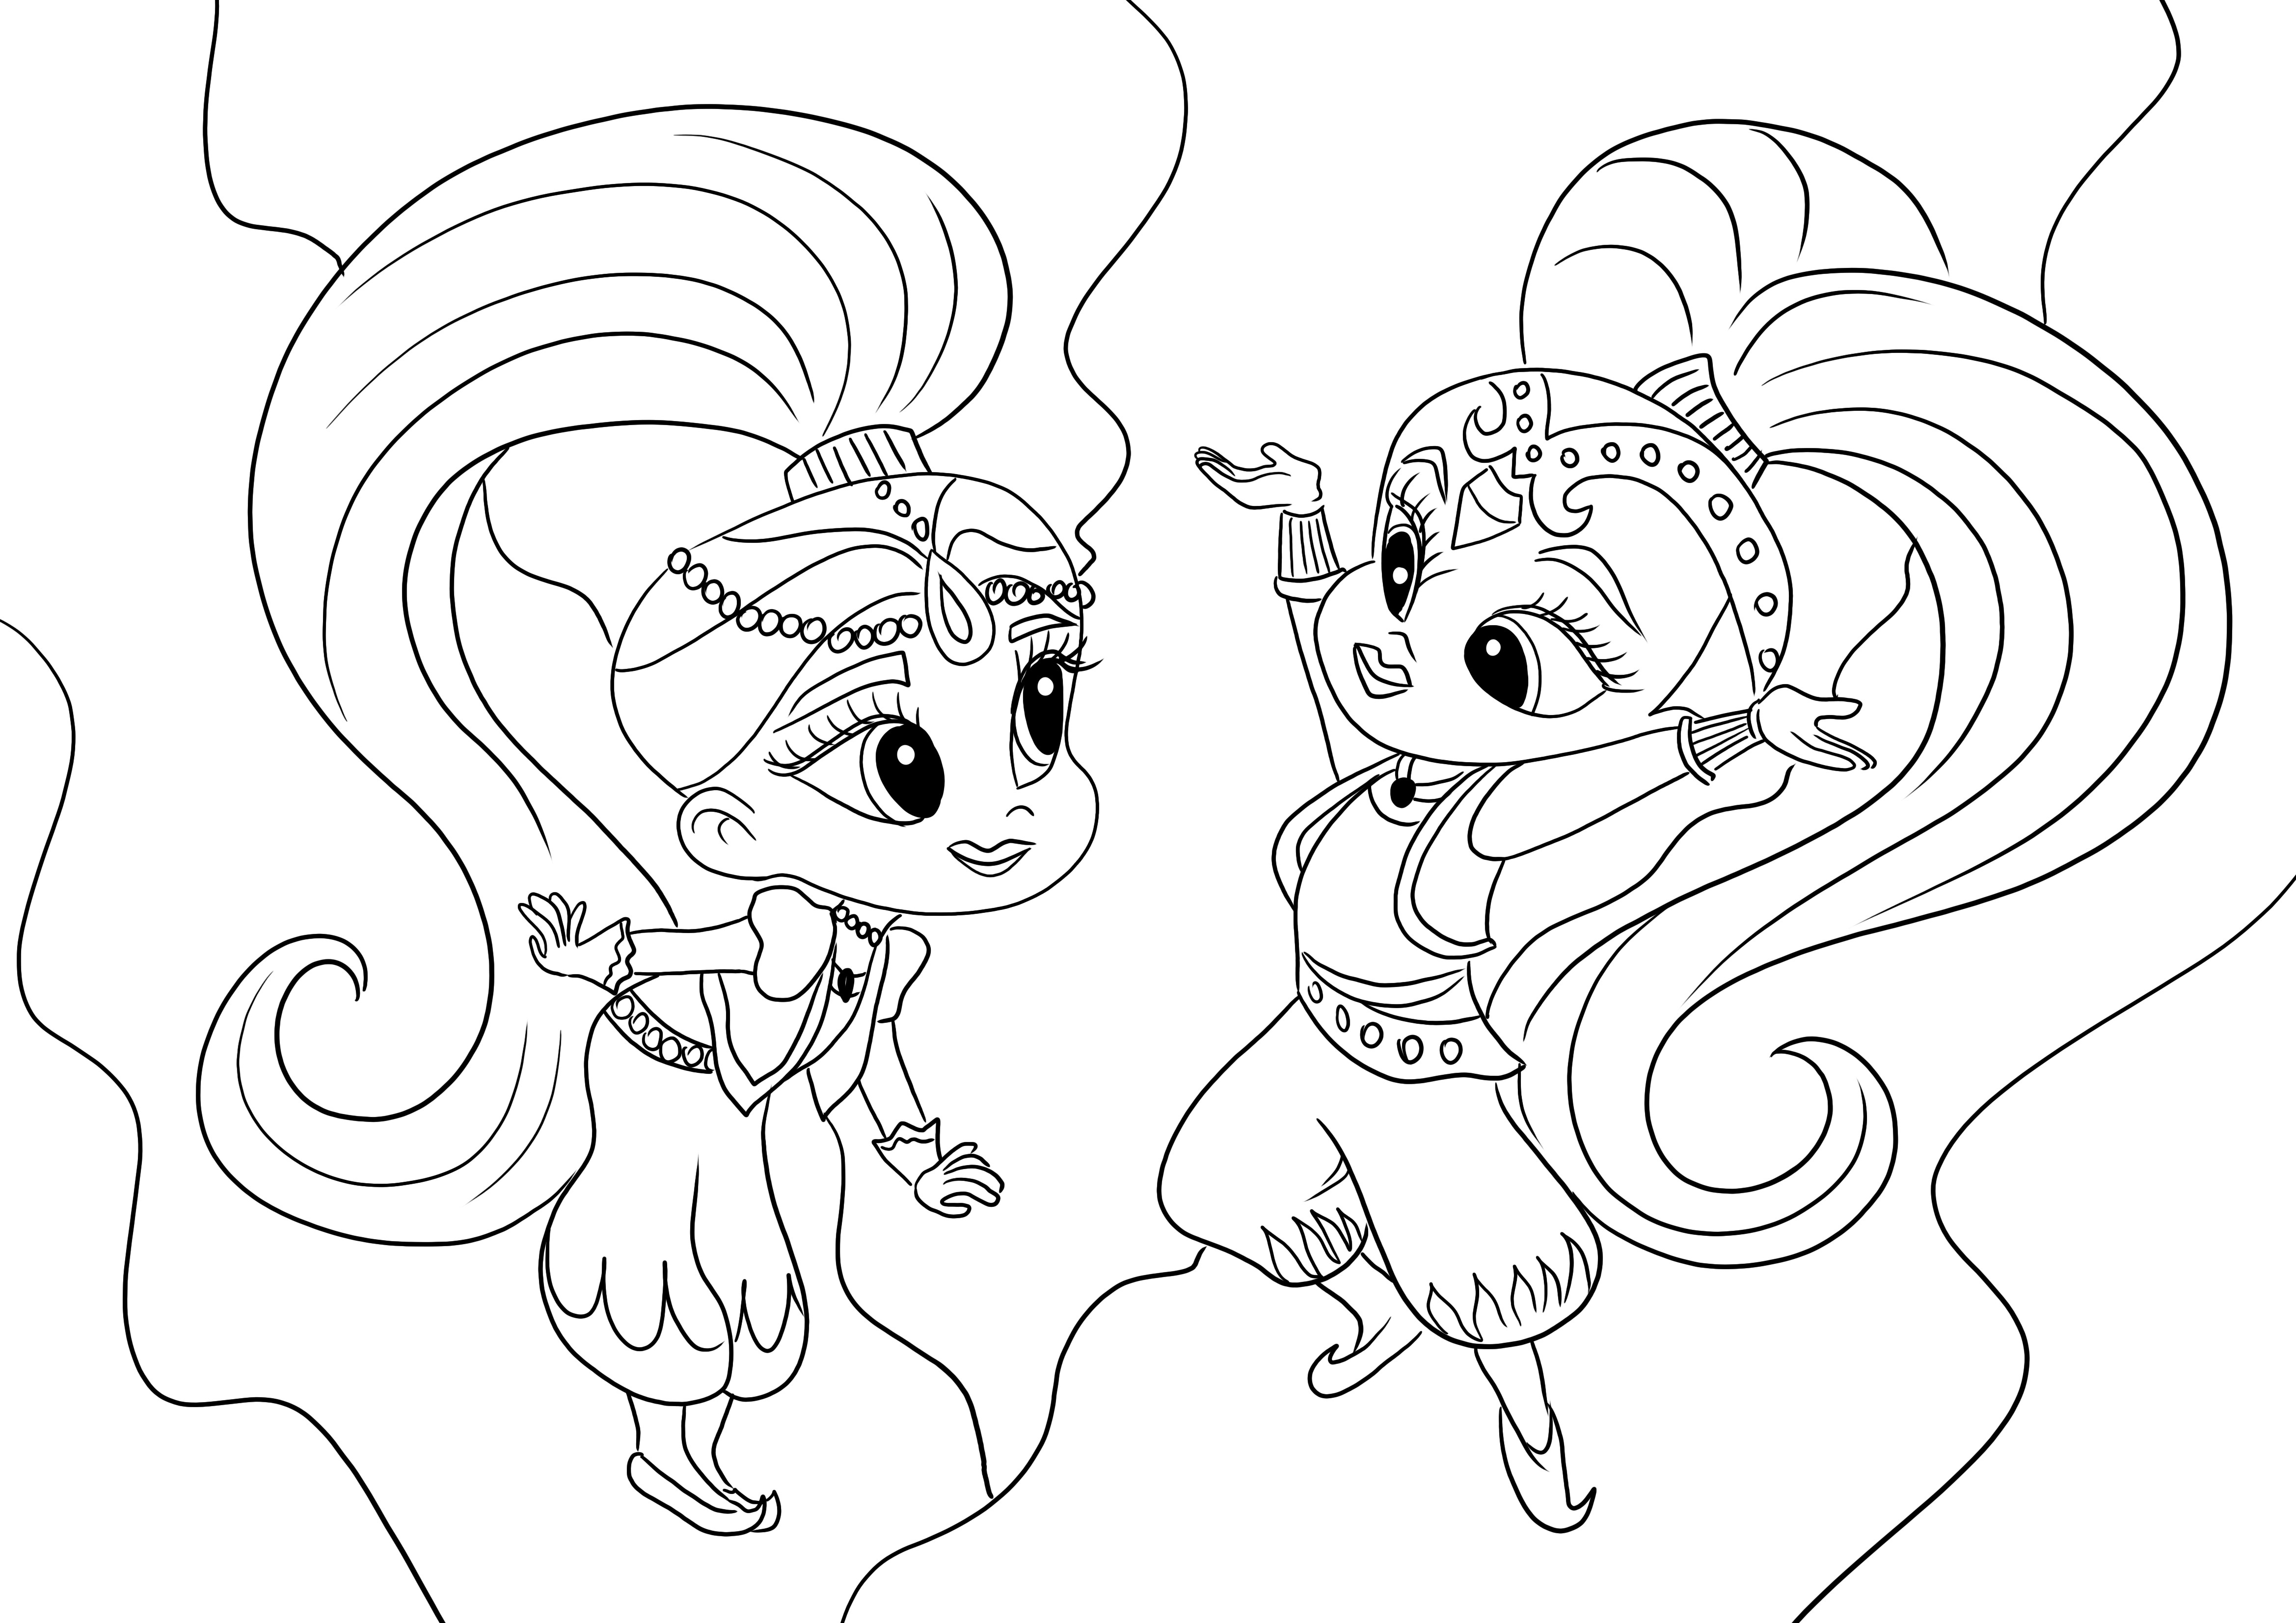 Shimmer and Shine are dancing and happy to be printed and colored for free